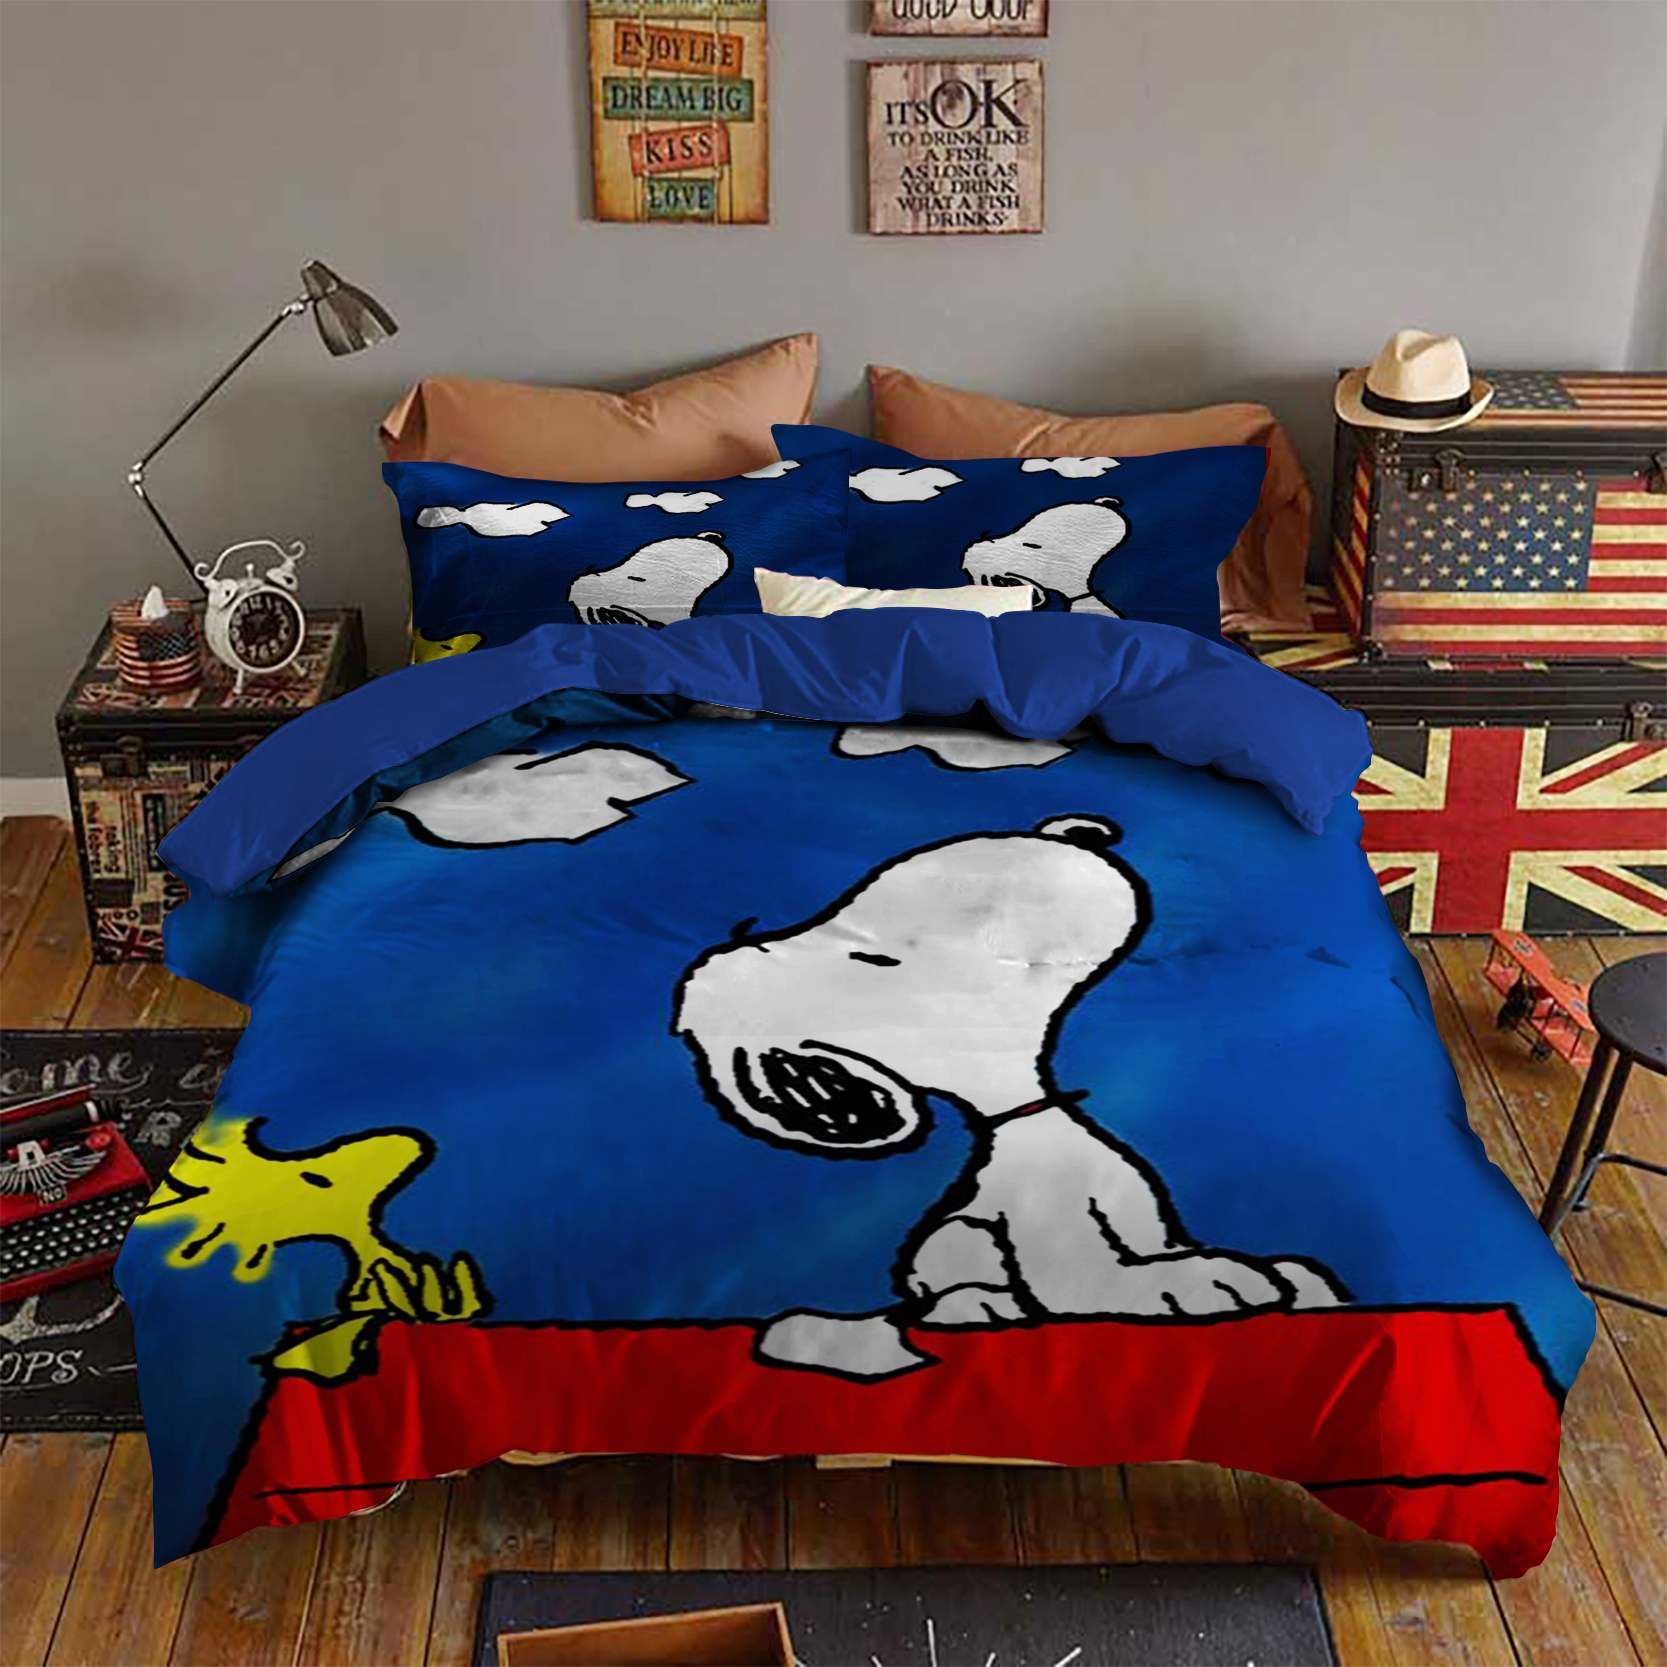 snoopy sheets